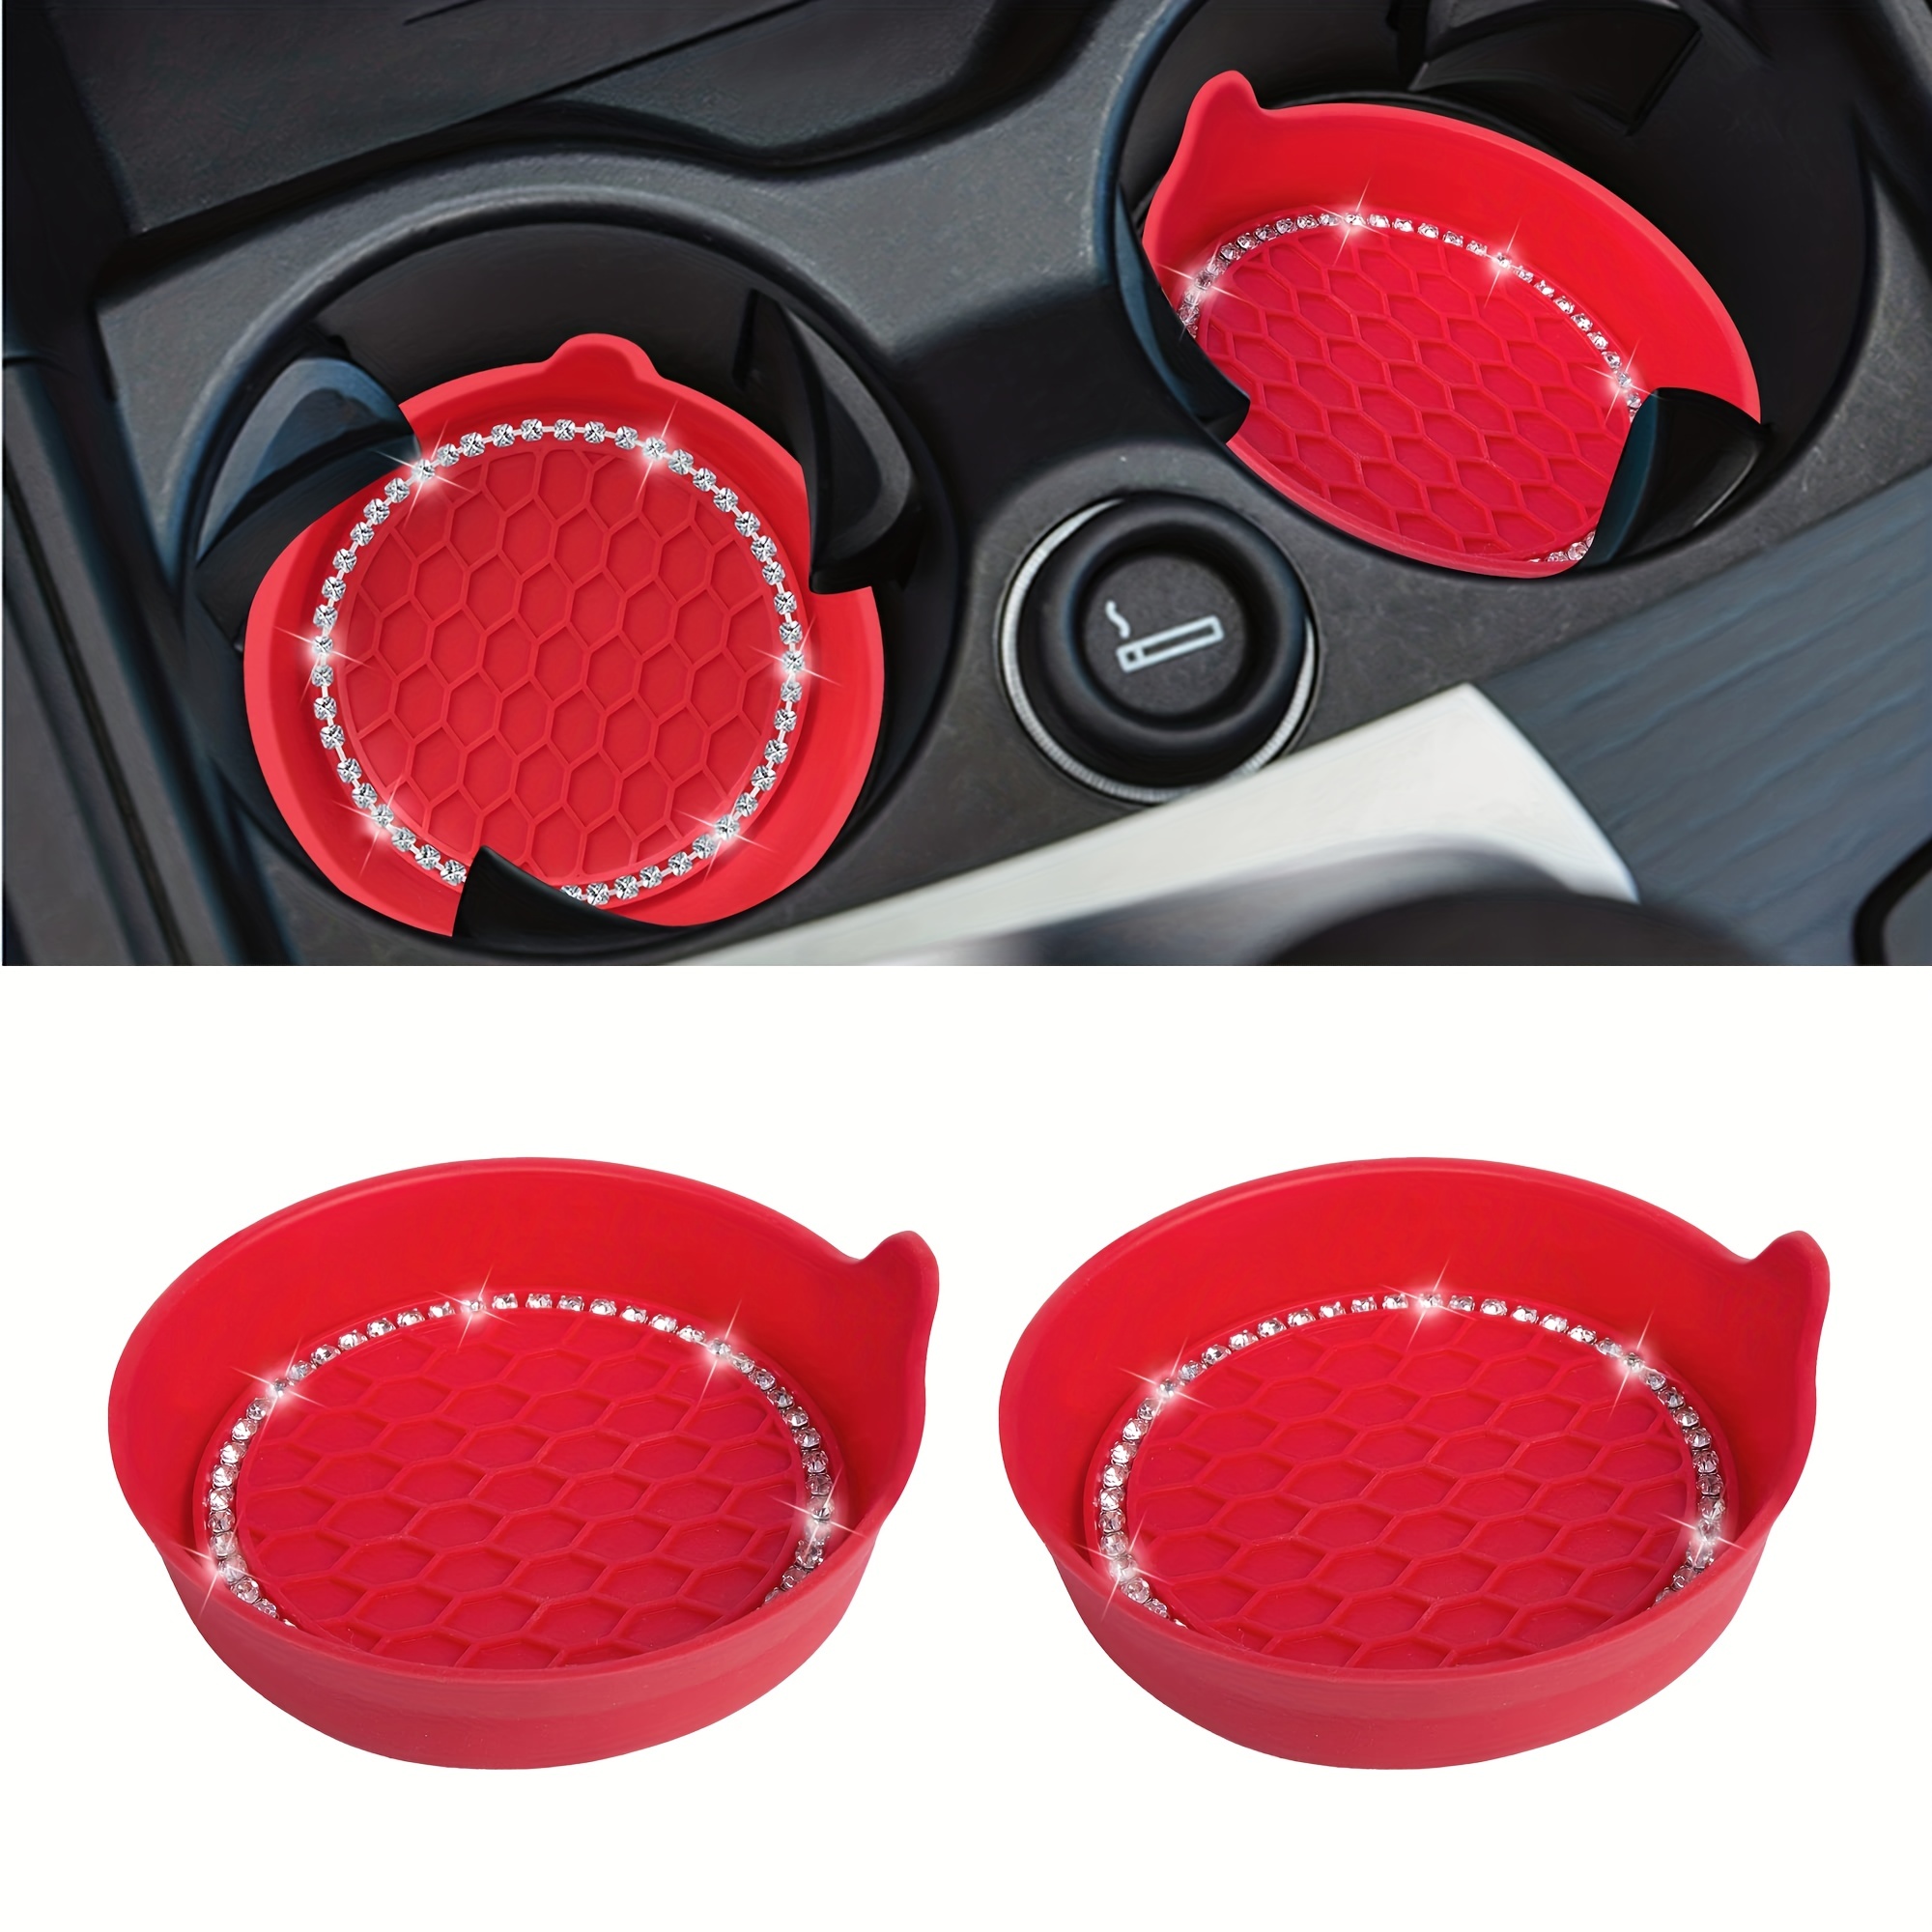 Bling Car Cup Holder Coaster for Mercedes-Benz, Car India